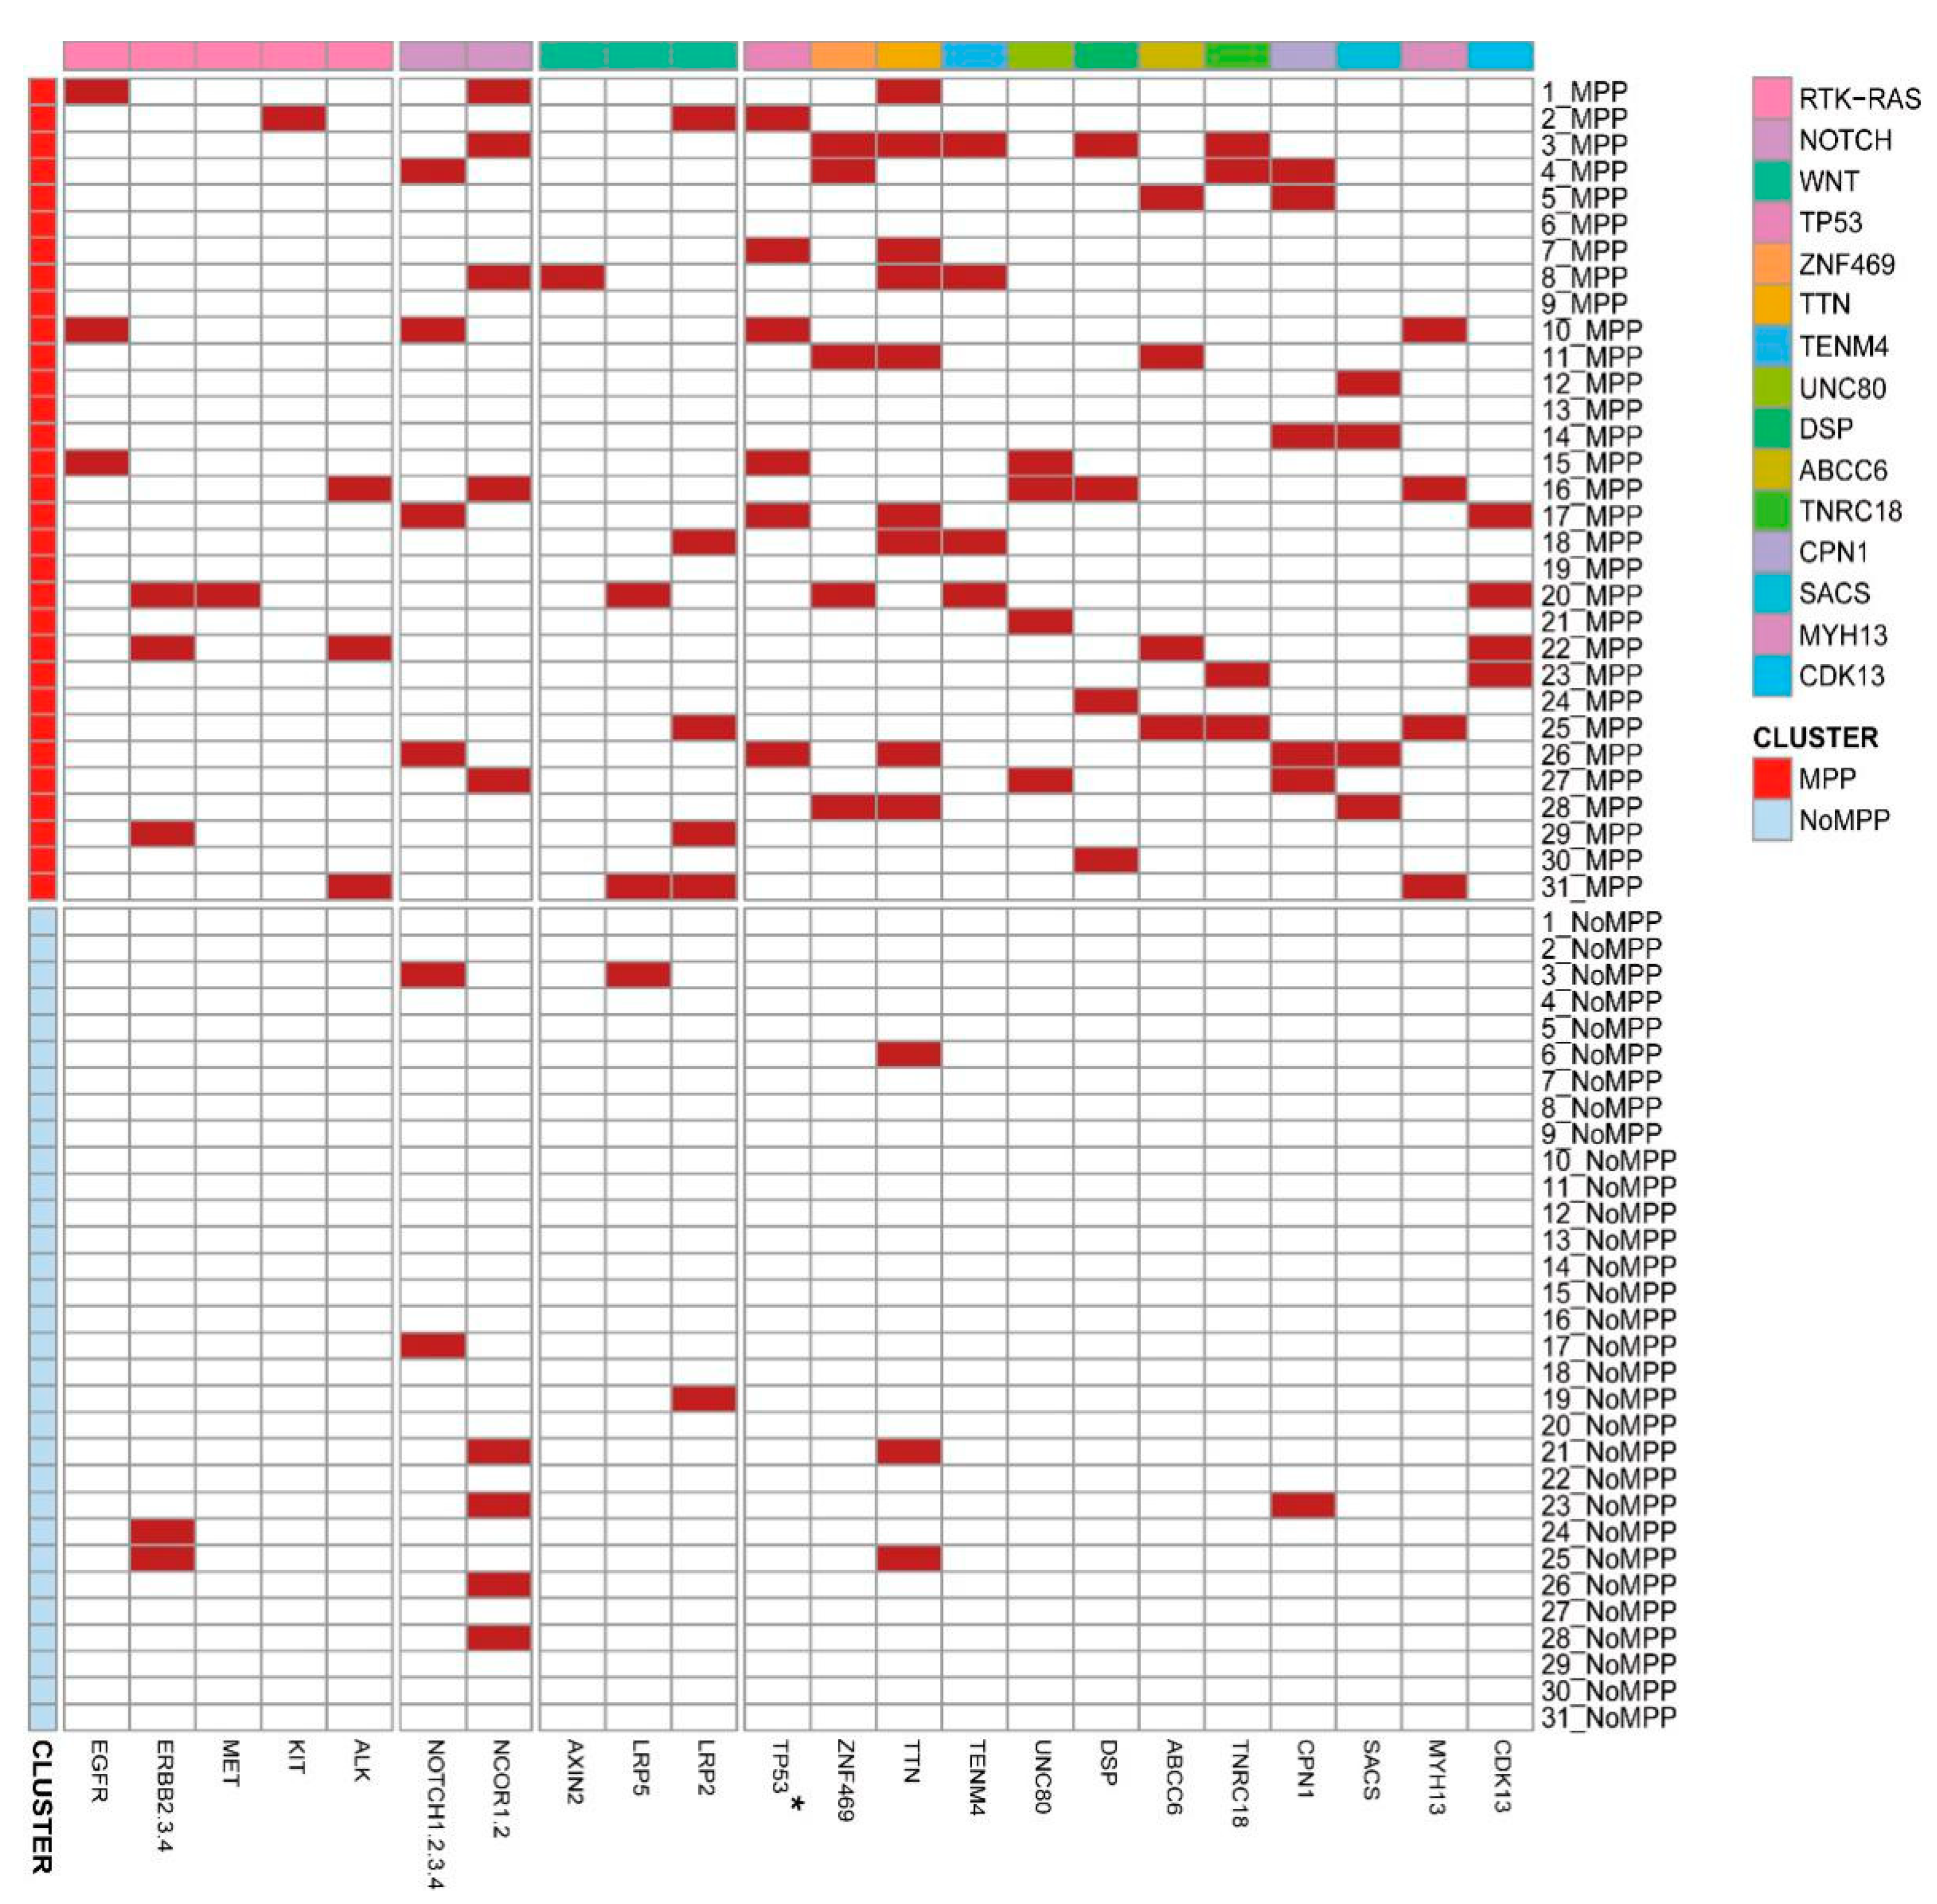 Cancers | Free Full-Text | Whole-Exome Sequencing Reveals the 